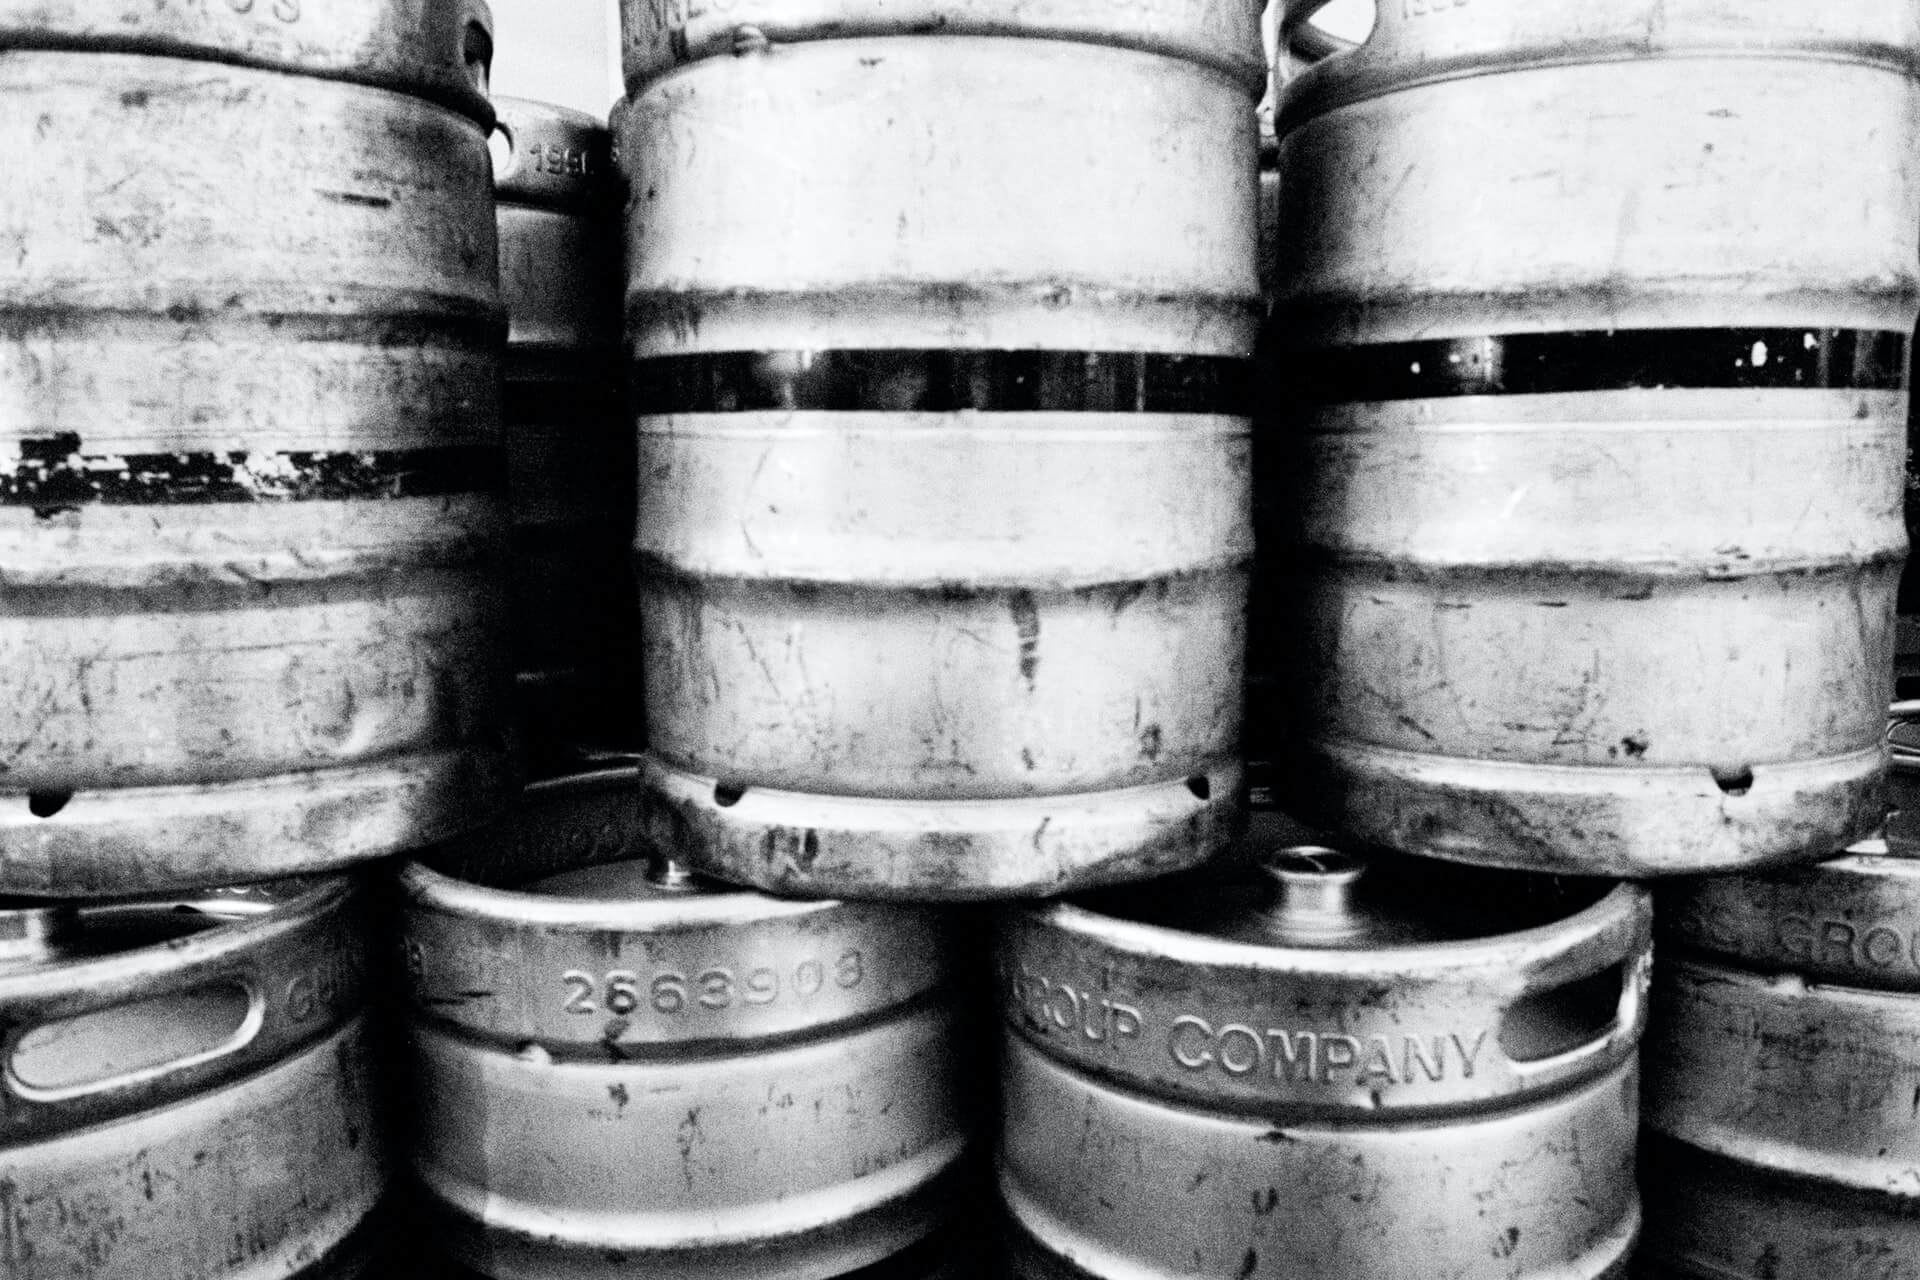 Stack of beer kegs in black and white